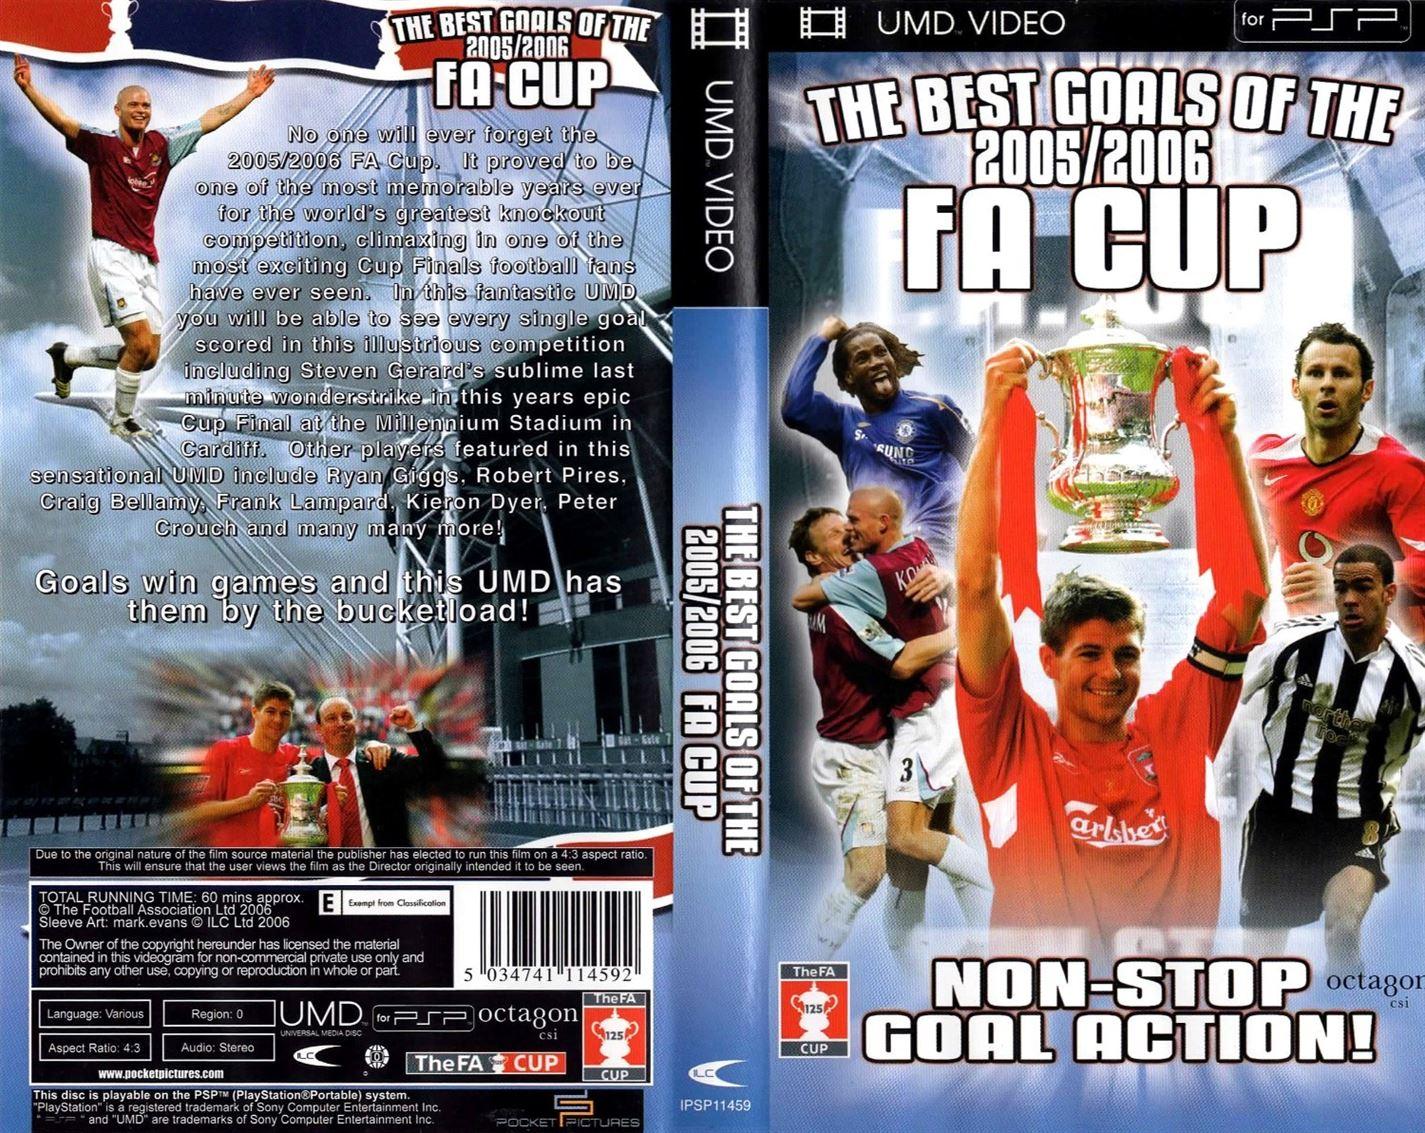 The Best Goals OF The 2005-2006 F.A Cup (UMD for PSP) - UK Seller